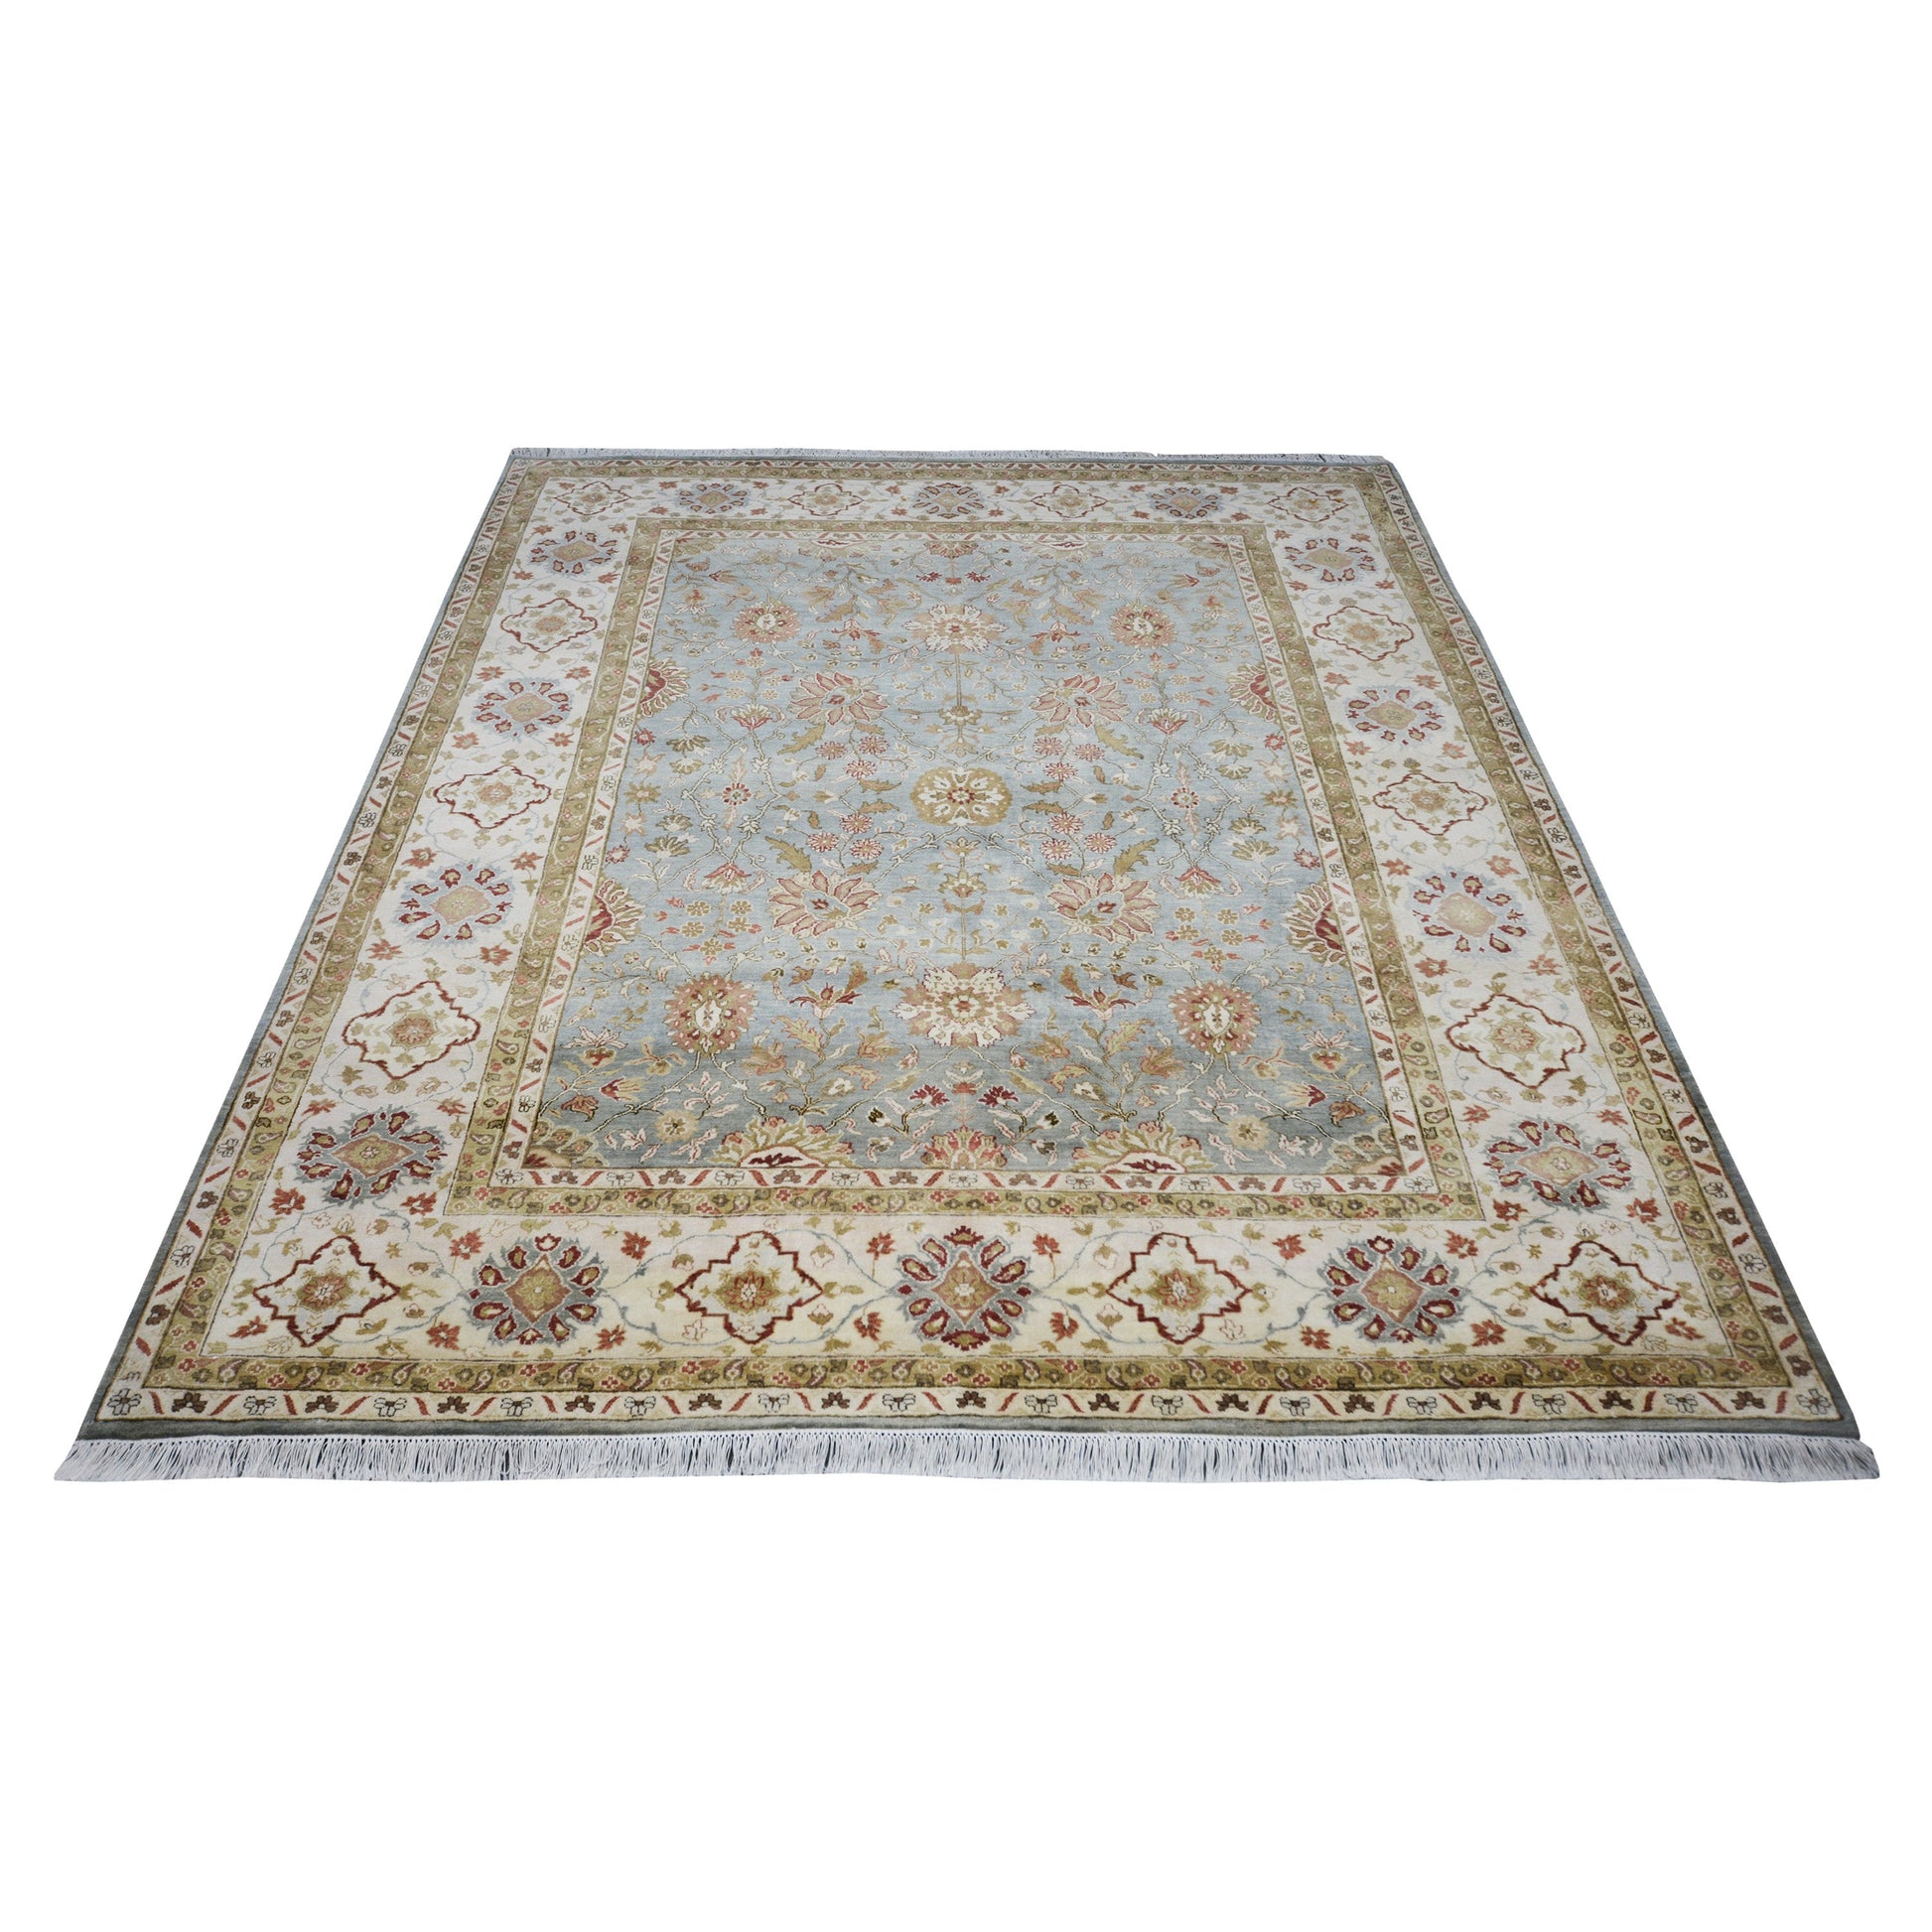 Get trendy with Floral Light Blue, Brown, Ivory and Red Traditional Pure Wool Jaipur Handknotted Area Rug - Contemporary Rugs available at Jaipur Oriental Rugs. Grab yours for $3175.00 today!